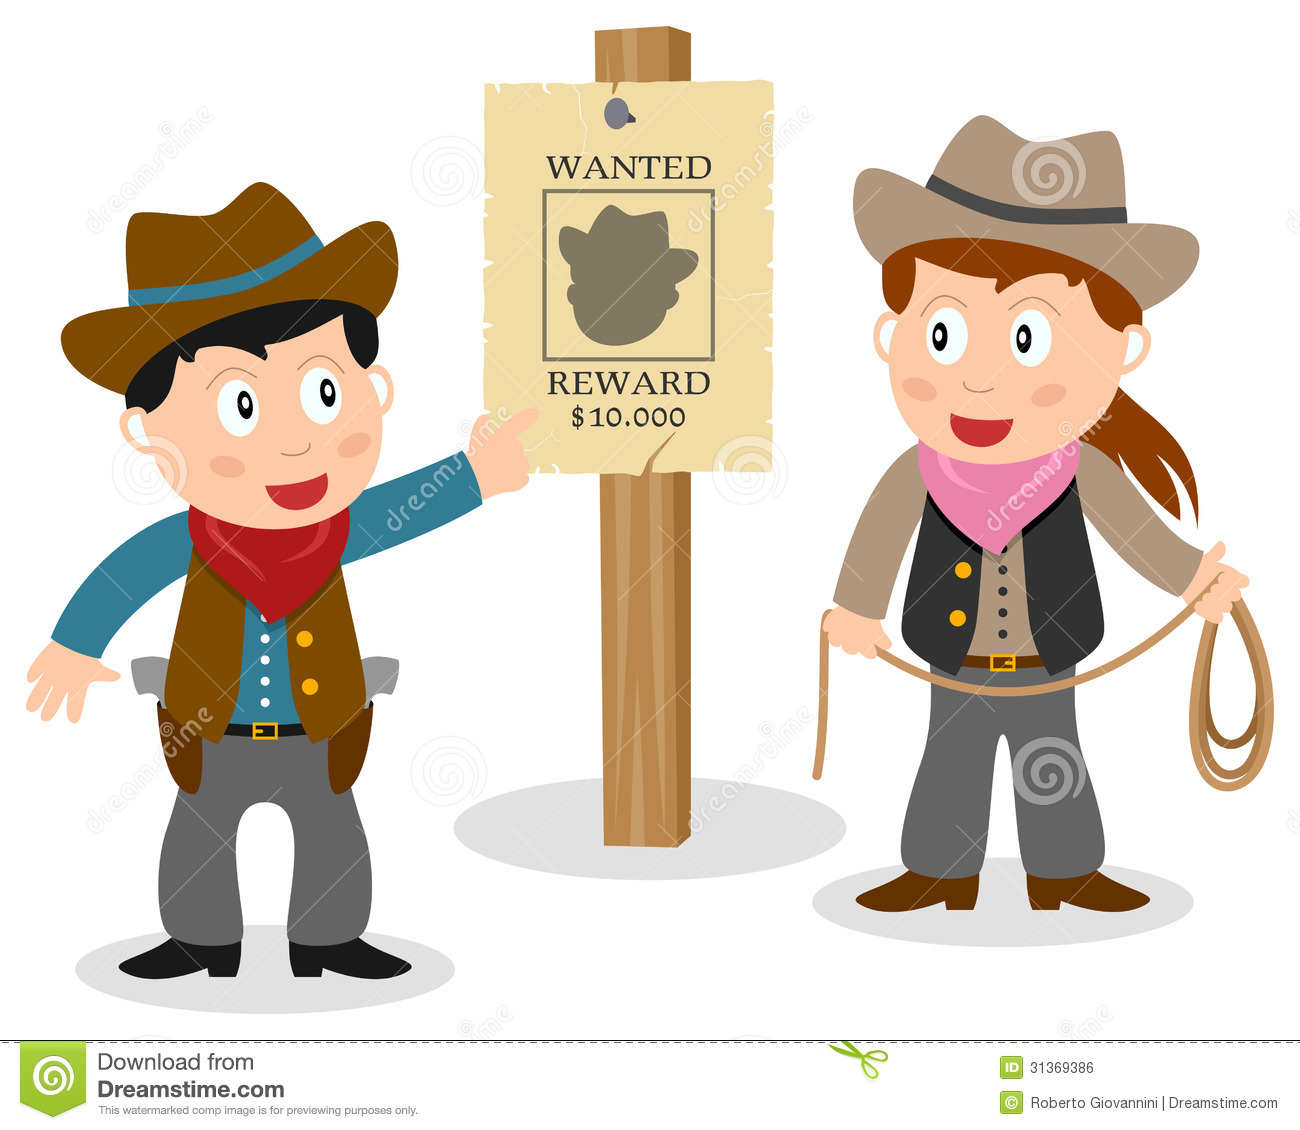 Two Cartoon Cowboy Kids  Boy And Girl  Looking At A Wanted Poster On